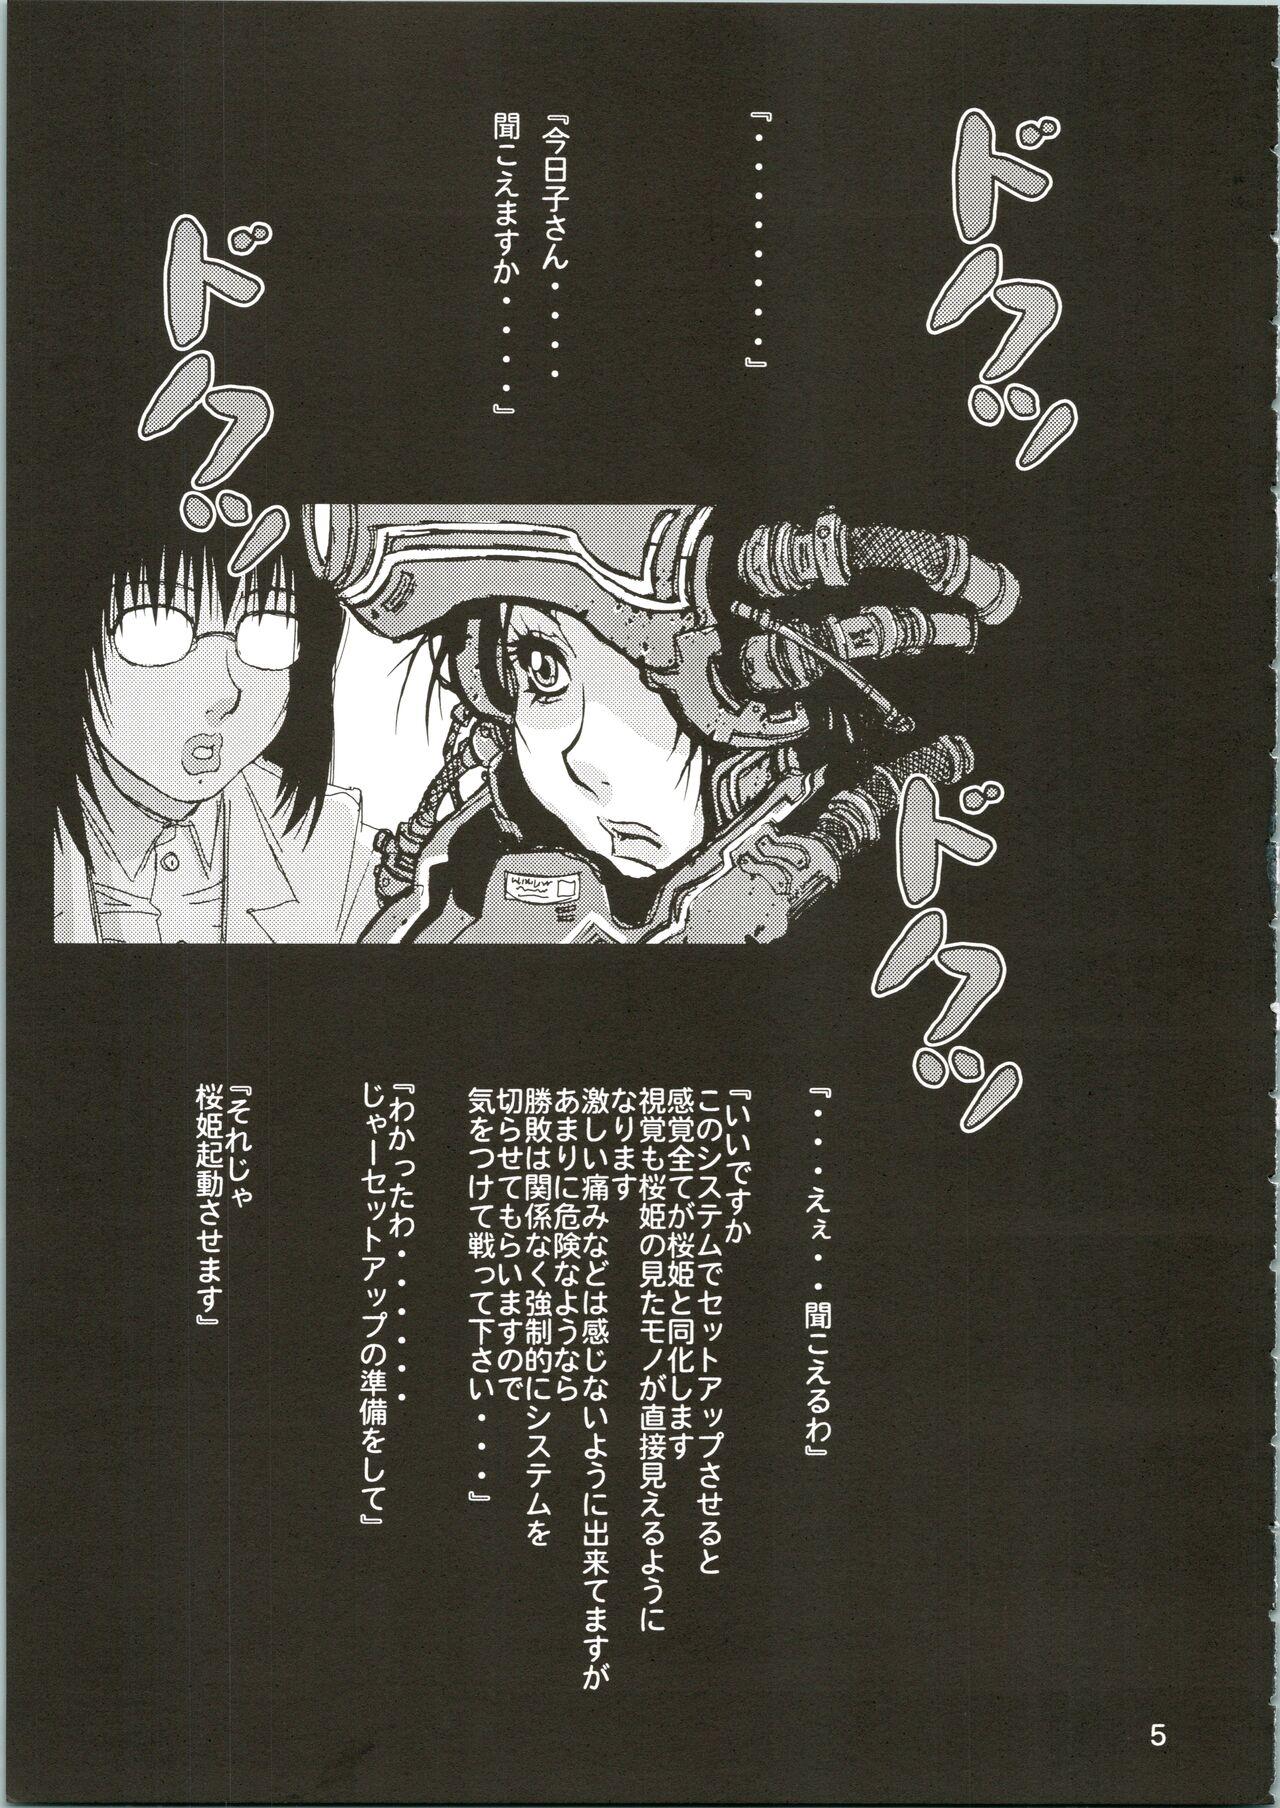 Jacking Girl Power Vol. 16 - Initial d Plawres sanshiro Spread - Page 5